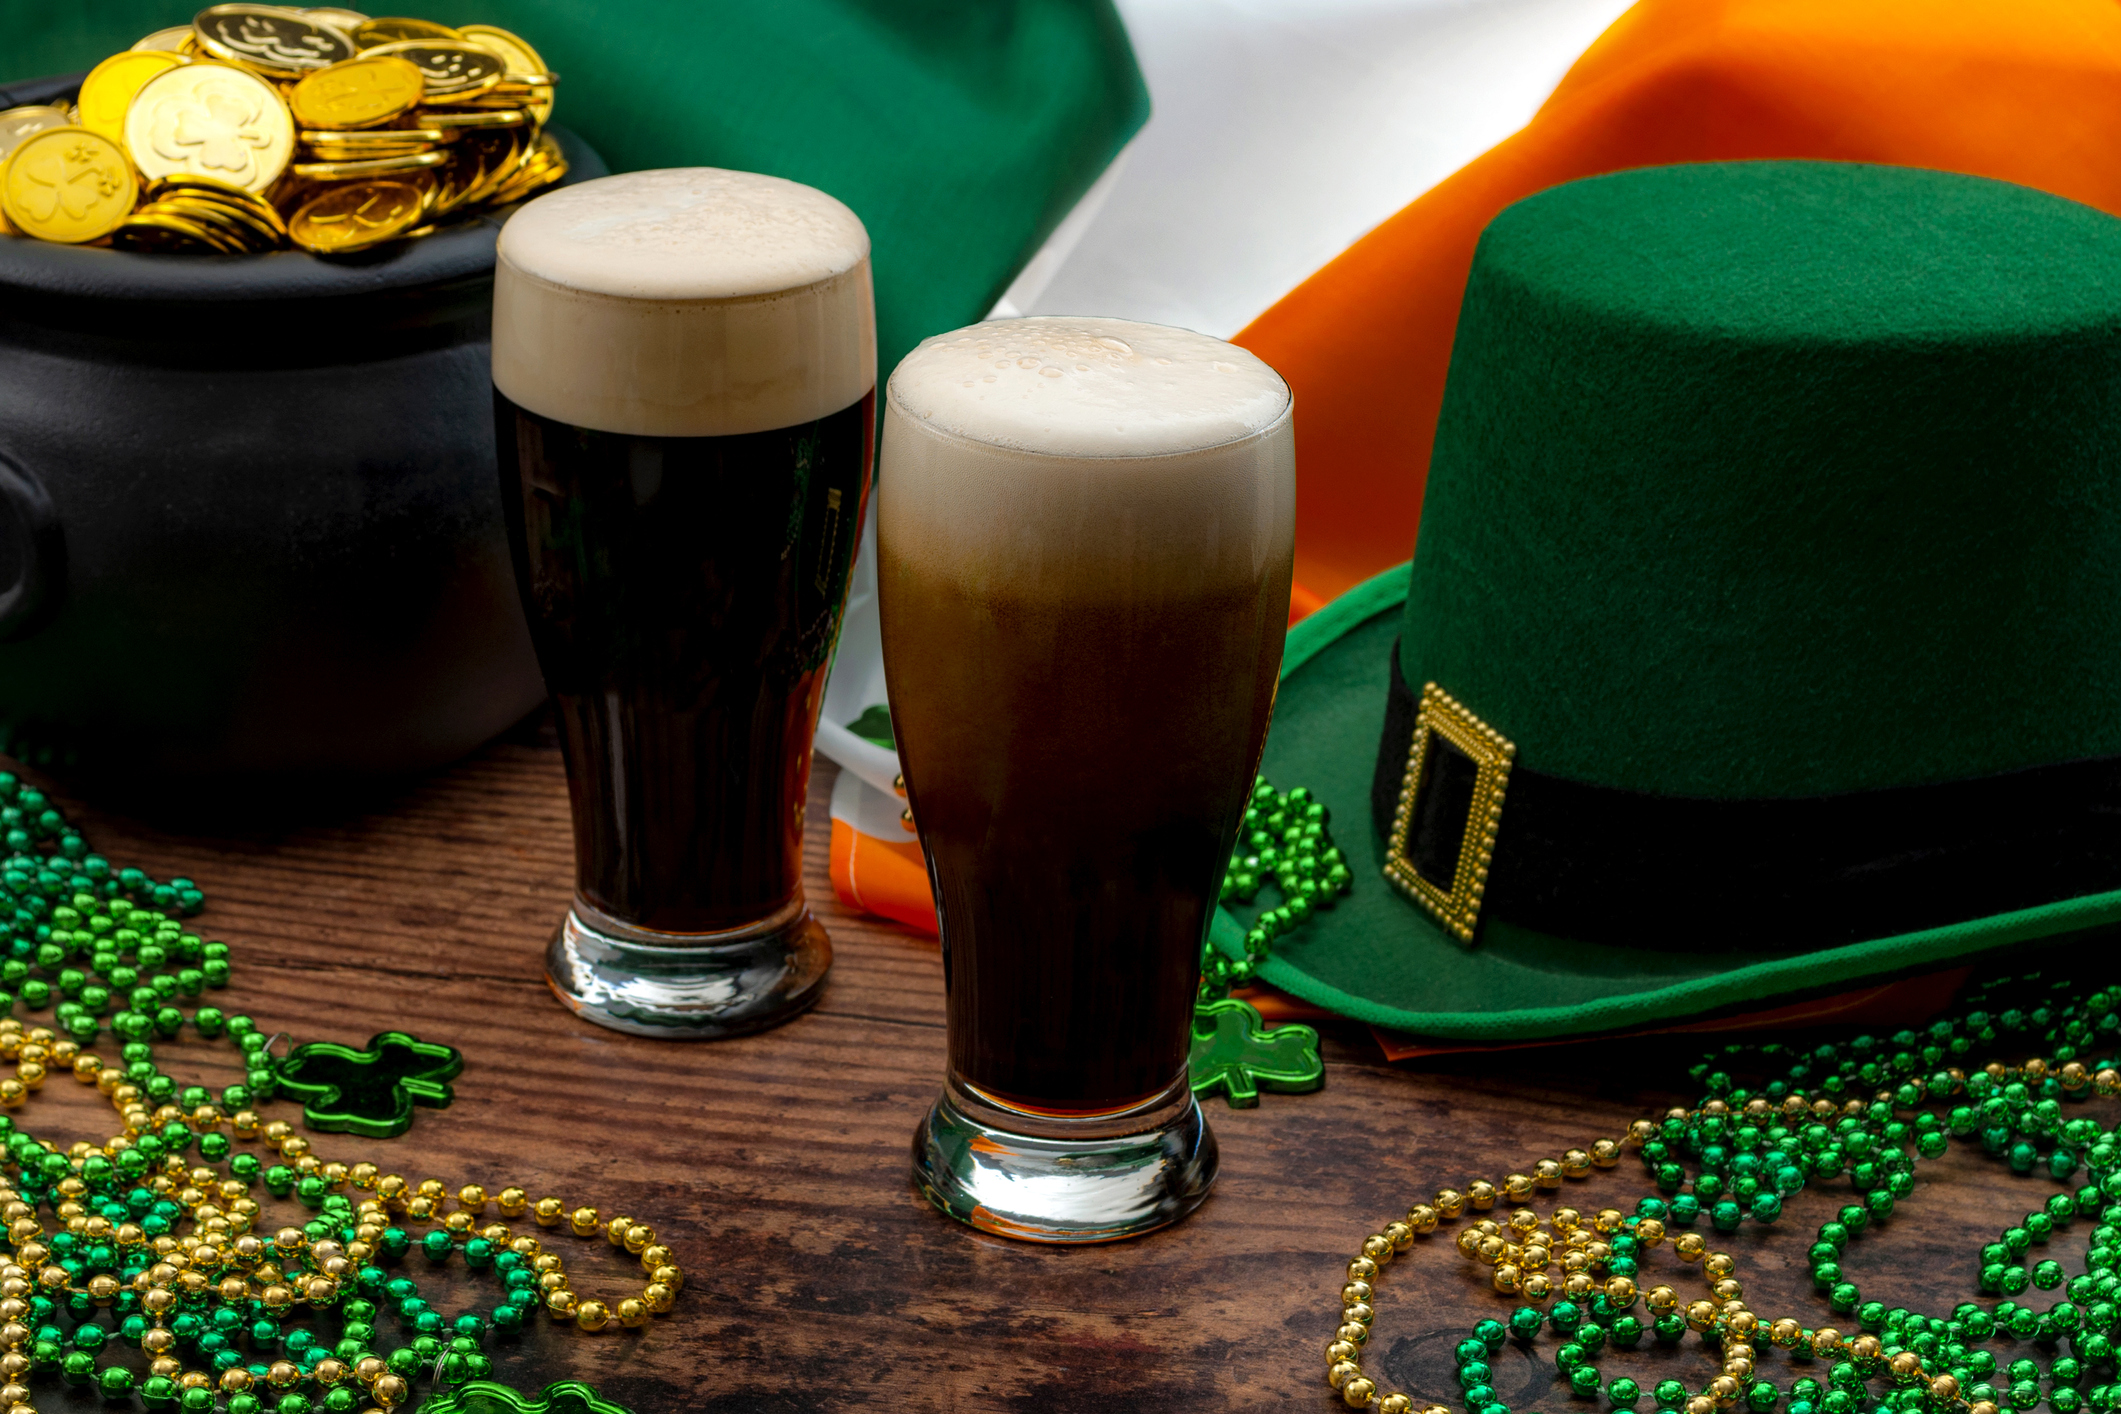 Why not celebrate St. Patrick's Day at a North Fork brewery or winery this week?